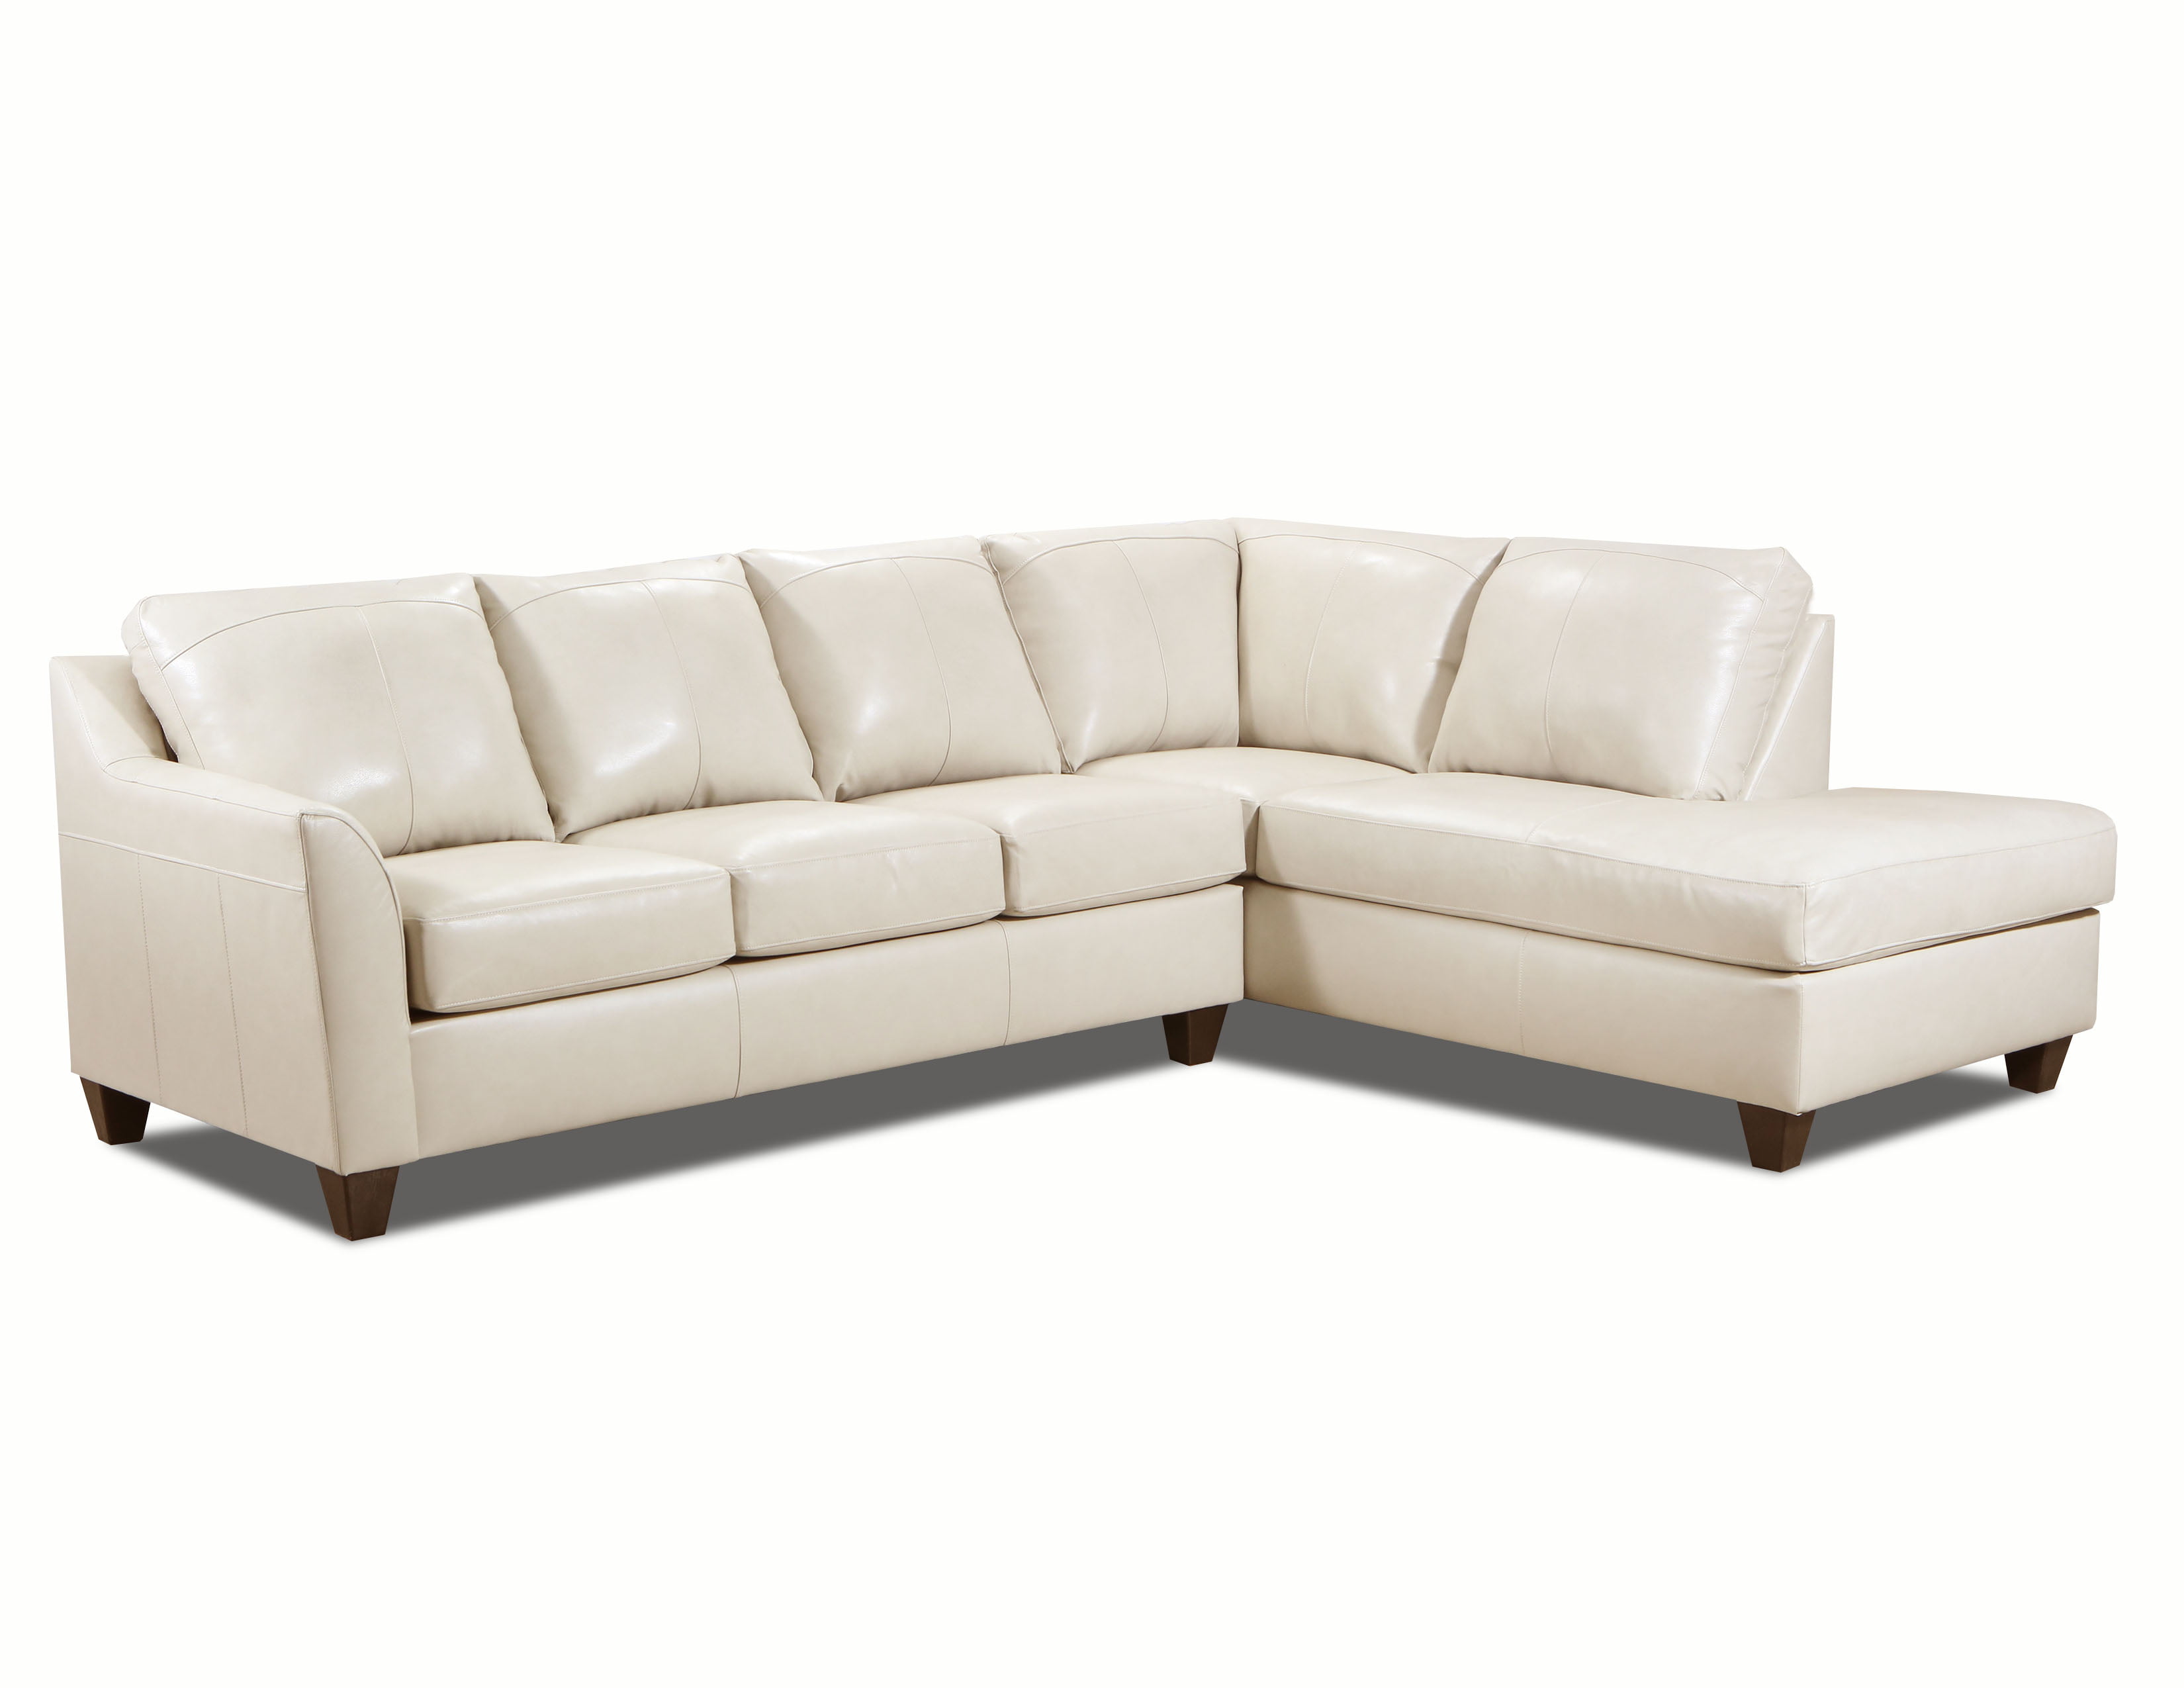 Lane Home Furnishings Soft Touch Cream Sectional Component RAF Bump